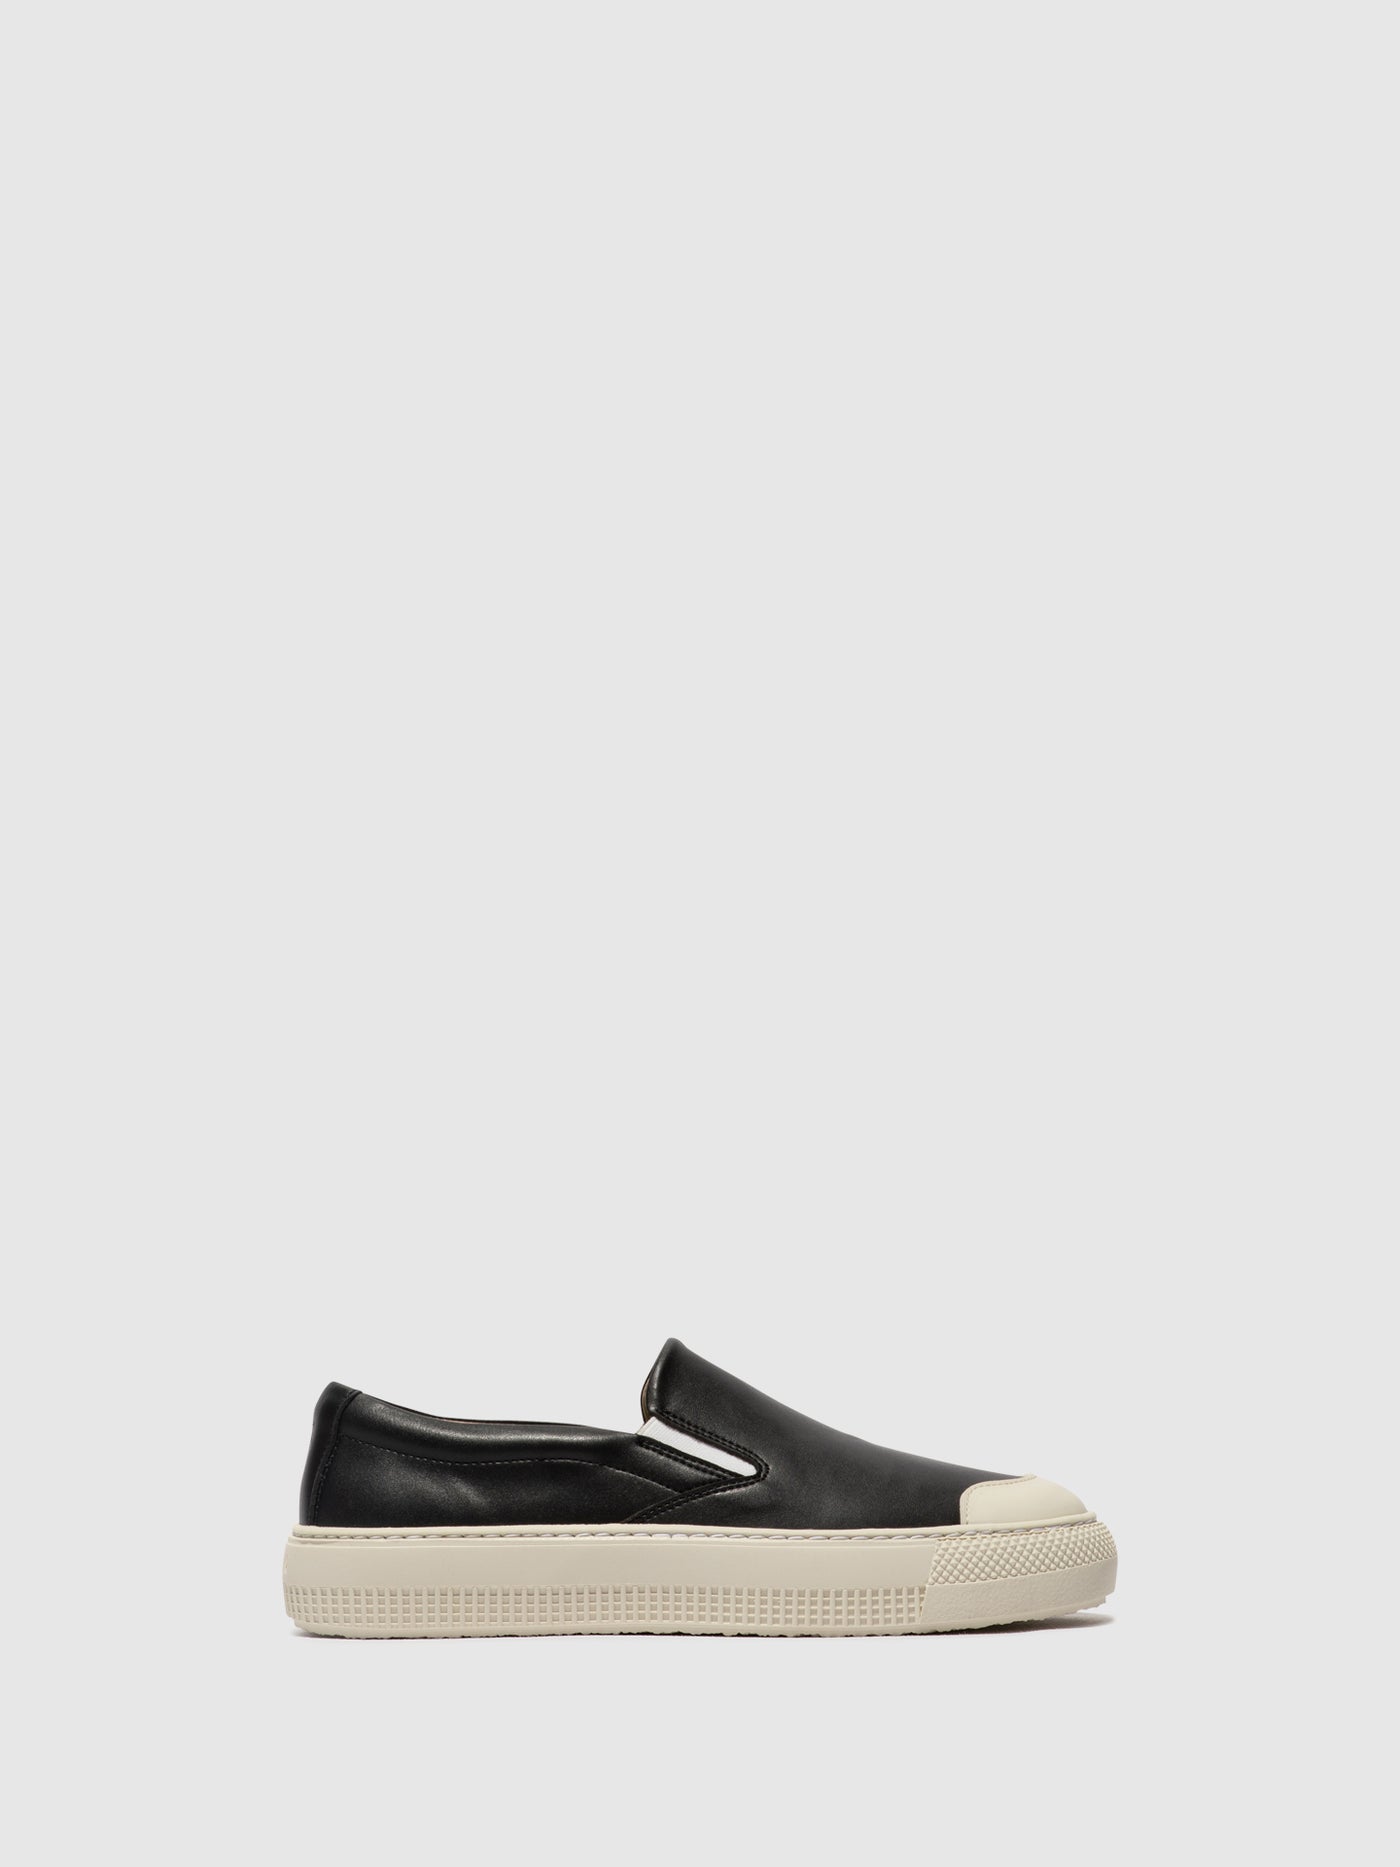 Slip-on Trainers TOAF584FLY BLACK